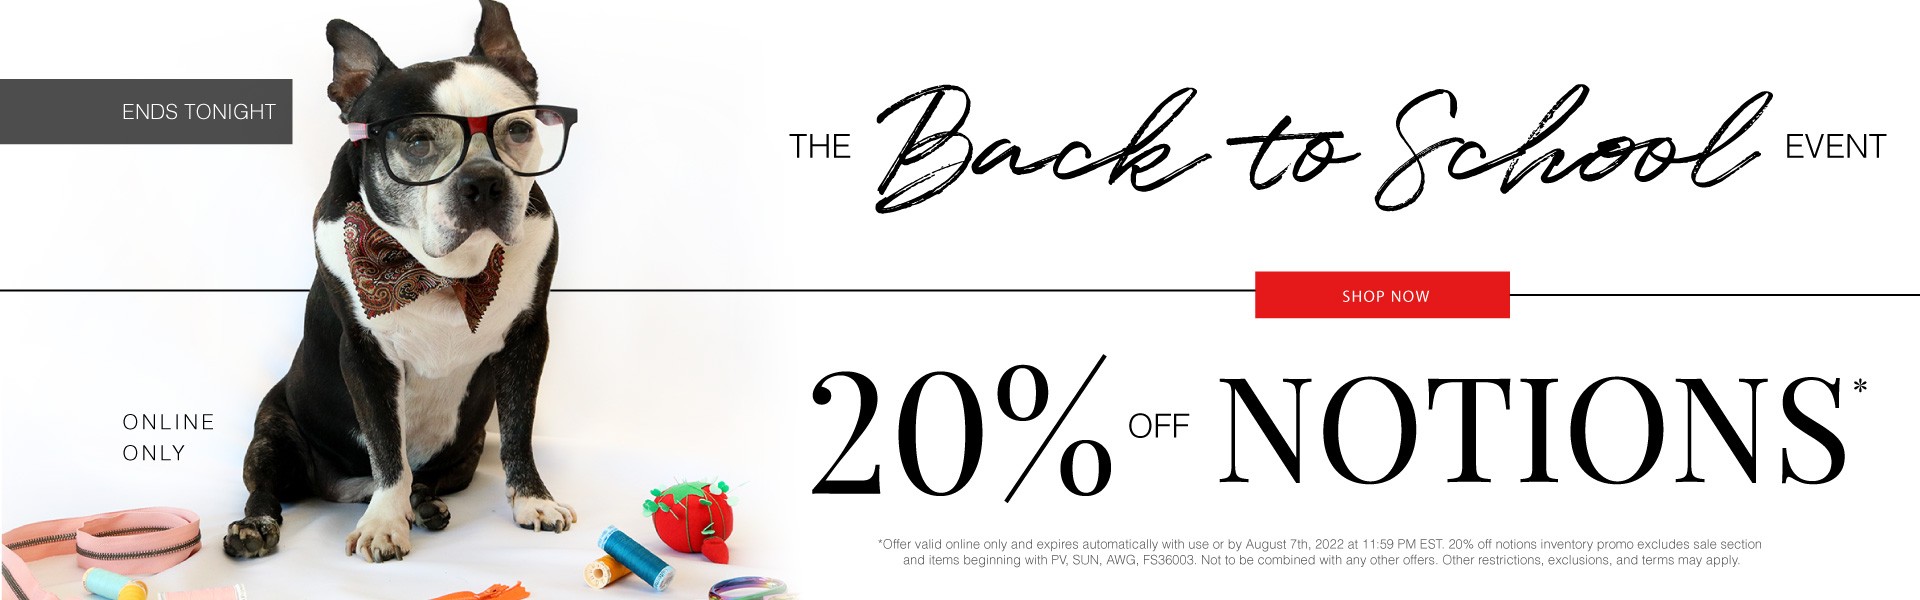 Last Chance! Shop 20% Off Notions Today!